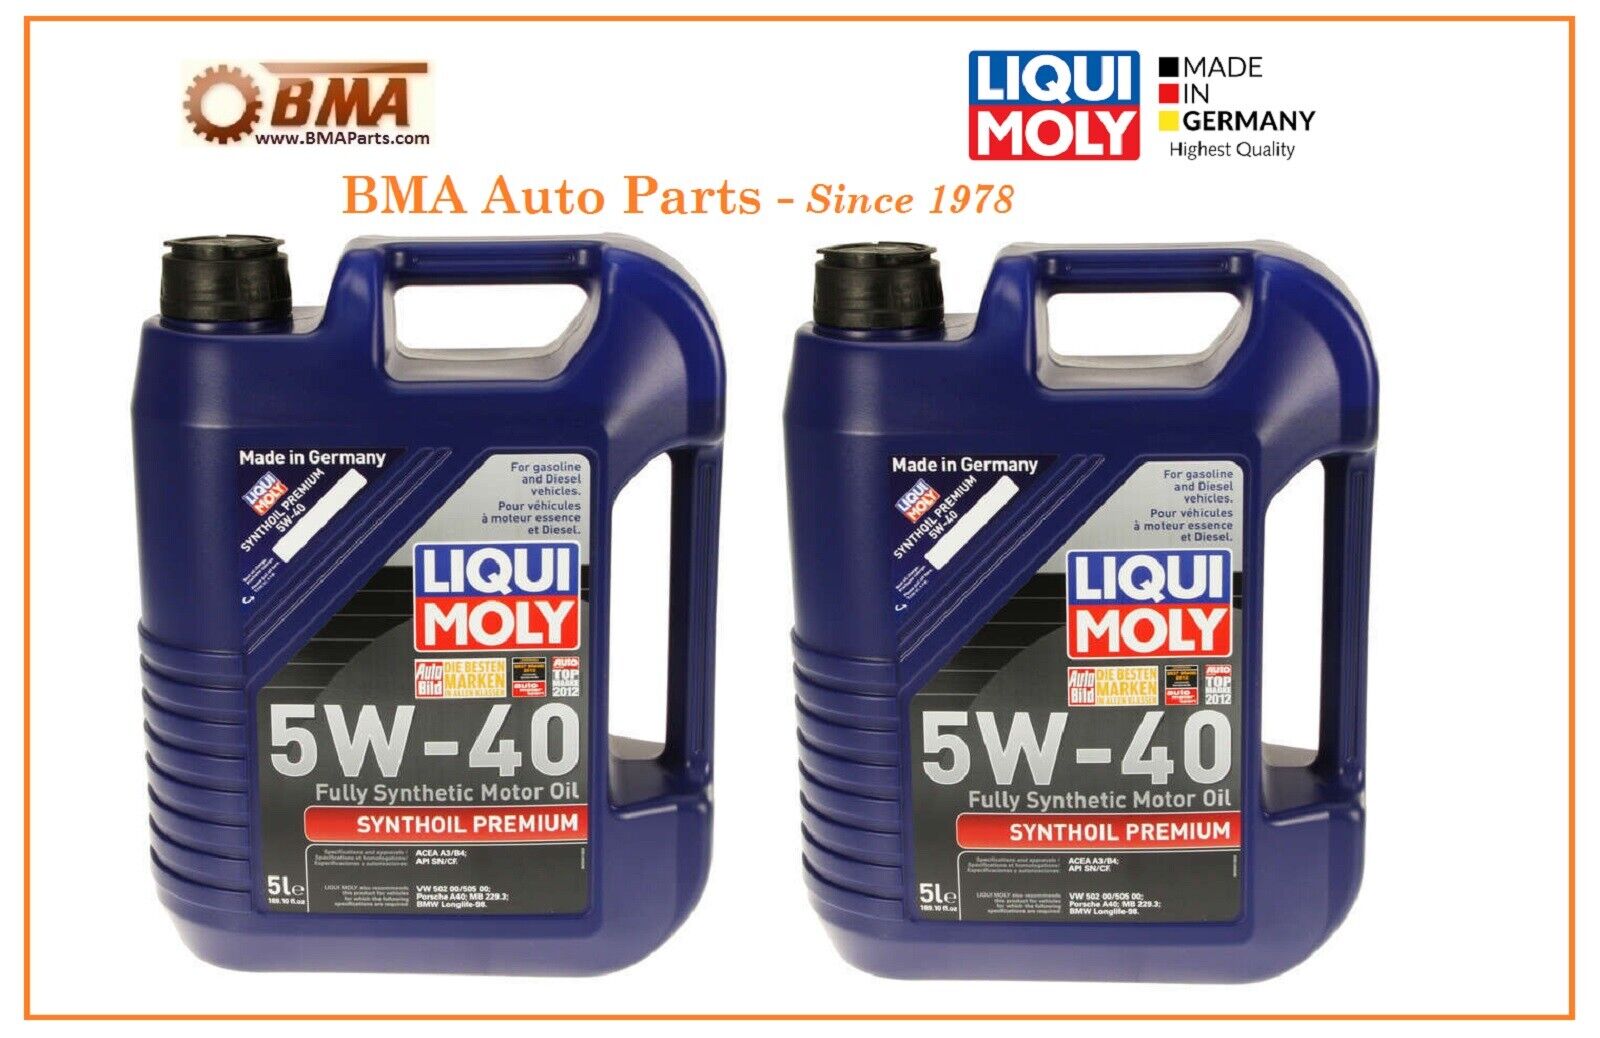 NEW LIQUI MOLY HIGH TECH GERMAN SYNTHETIC MOTOR OIL - 5W40 - 10 LITERS 2041